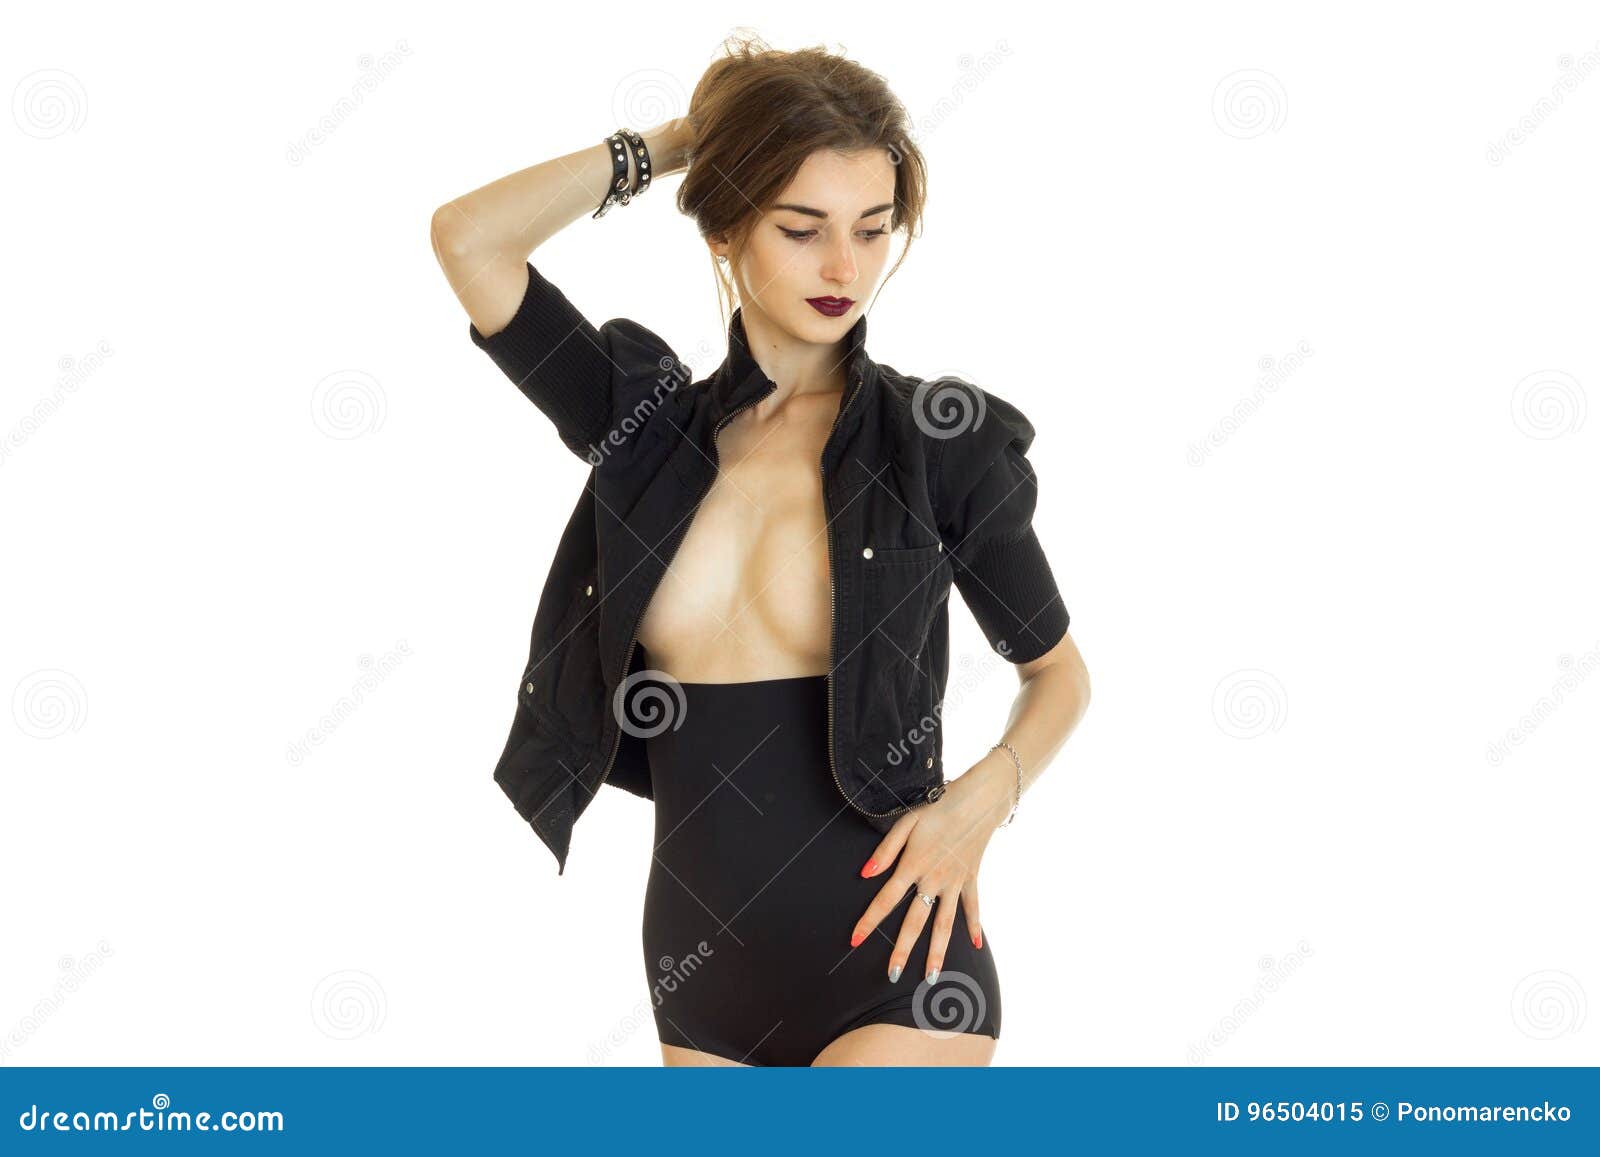 Sexual Lady With Big Boobs Without Bra Wears A Black Jacket And Panties  Isolated On White Background Stock Photo, Picture and Royalty Free Image.  Image 83002976.